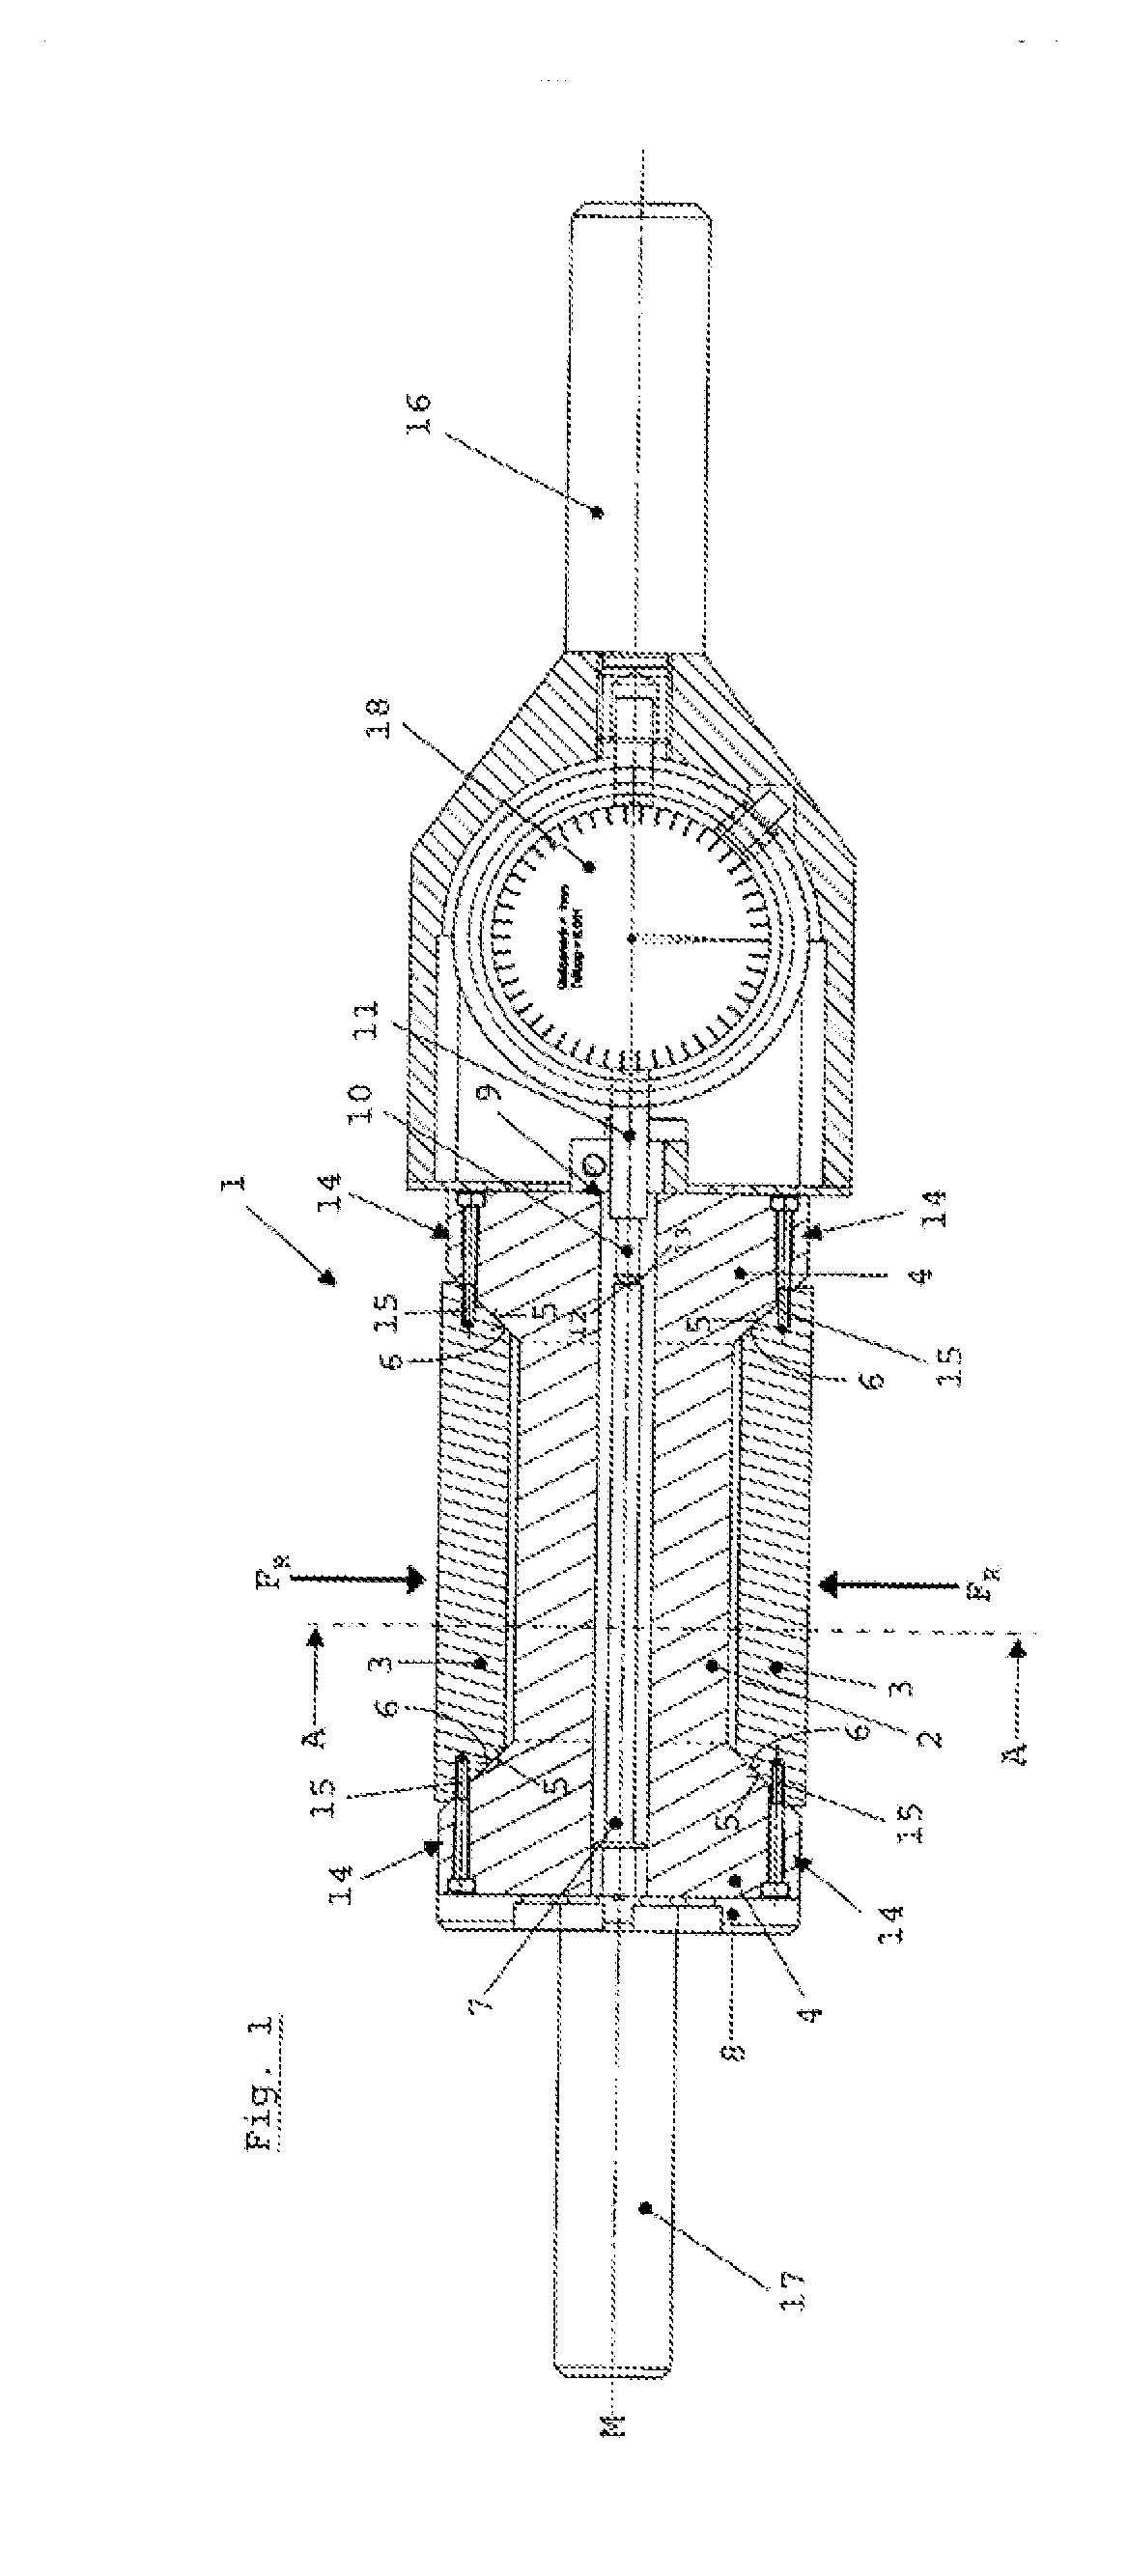 Force-measuring device